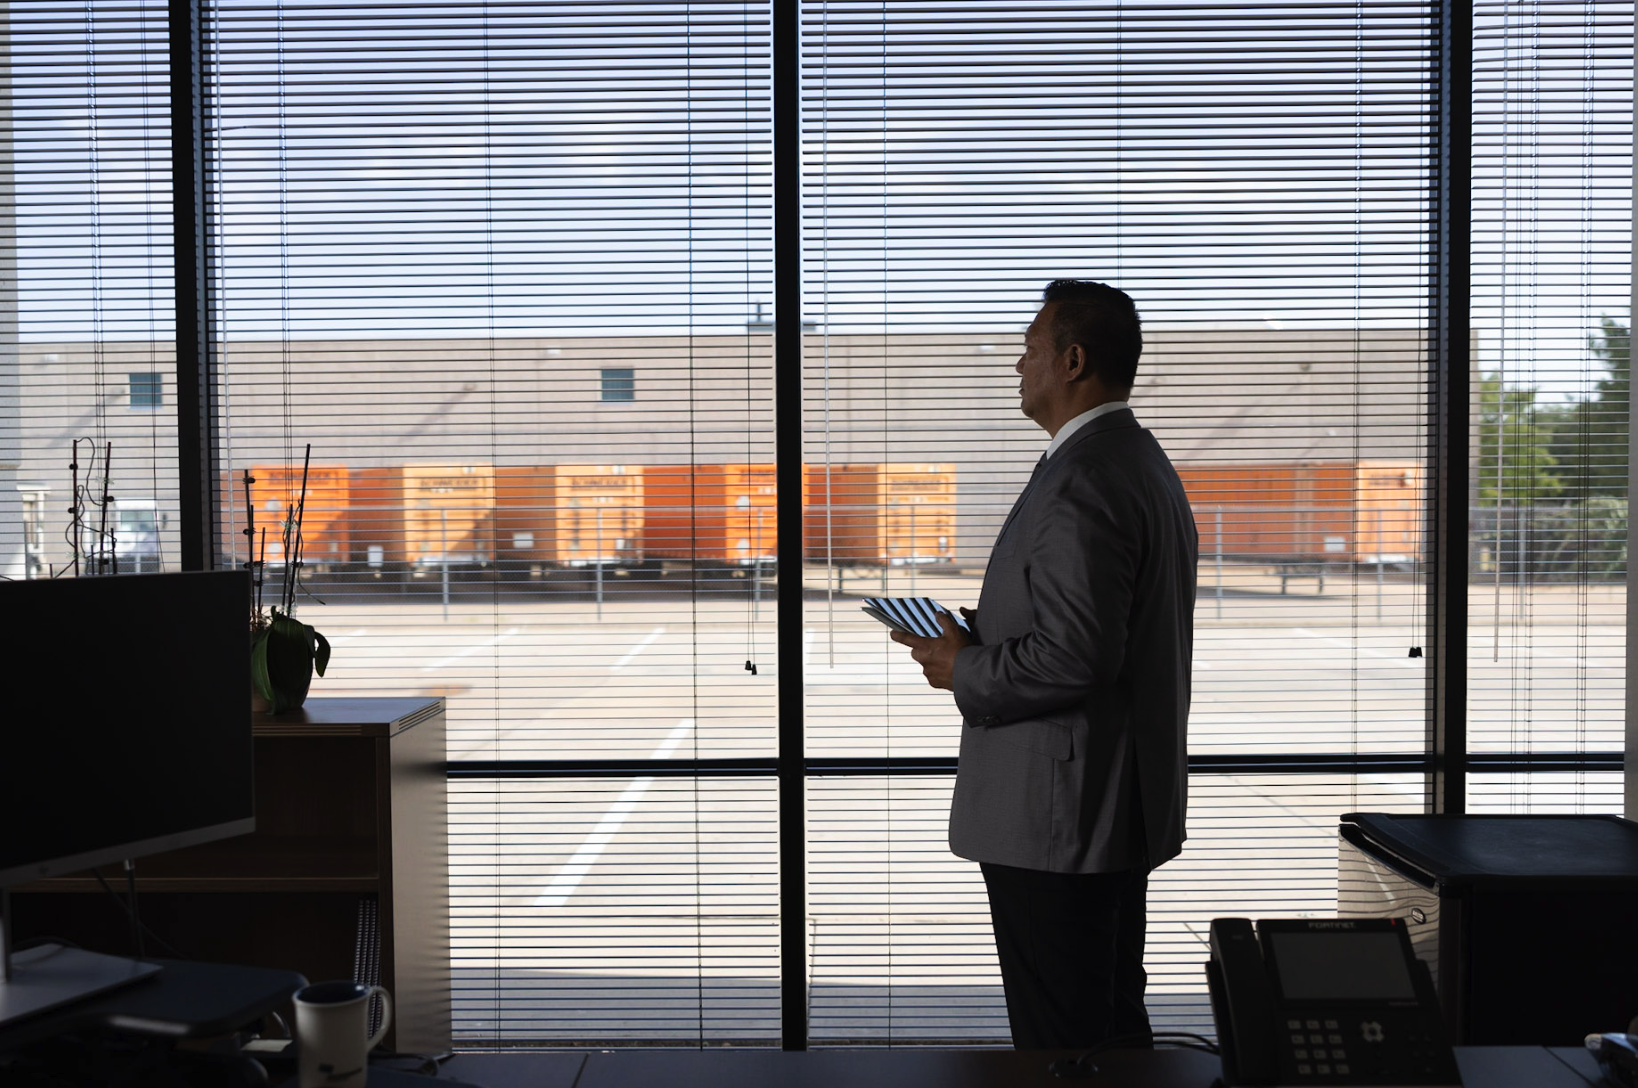 A Morrison employee in his office looking out the window at the trucks and warehouse symbolizing a commitment to service excellence and tailored logistics solutions for clients.